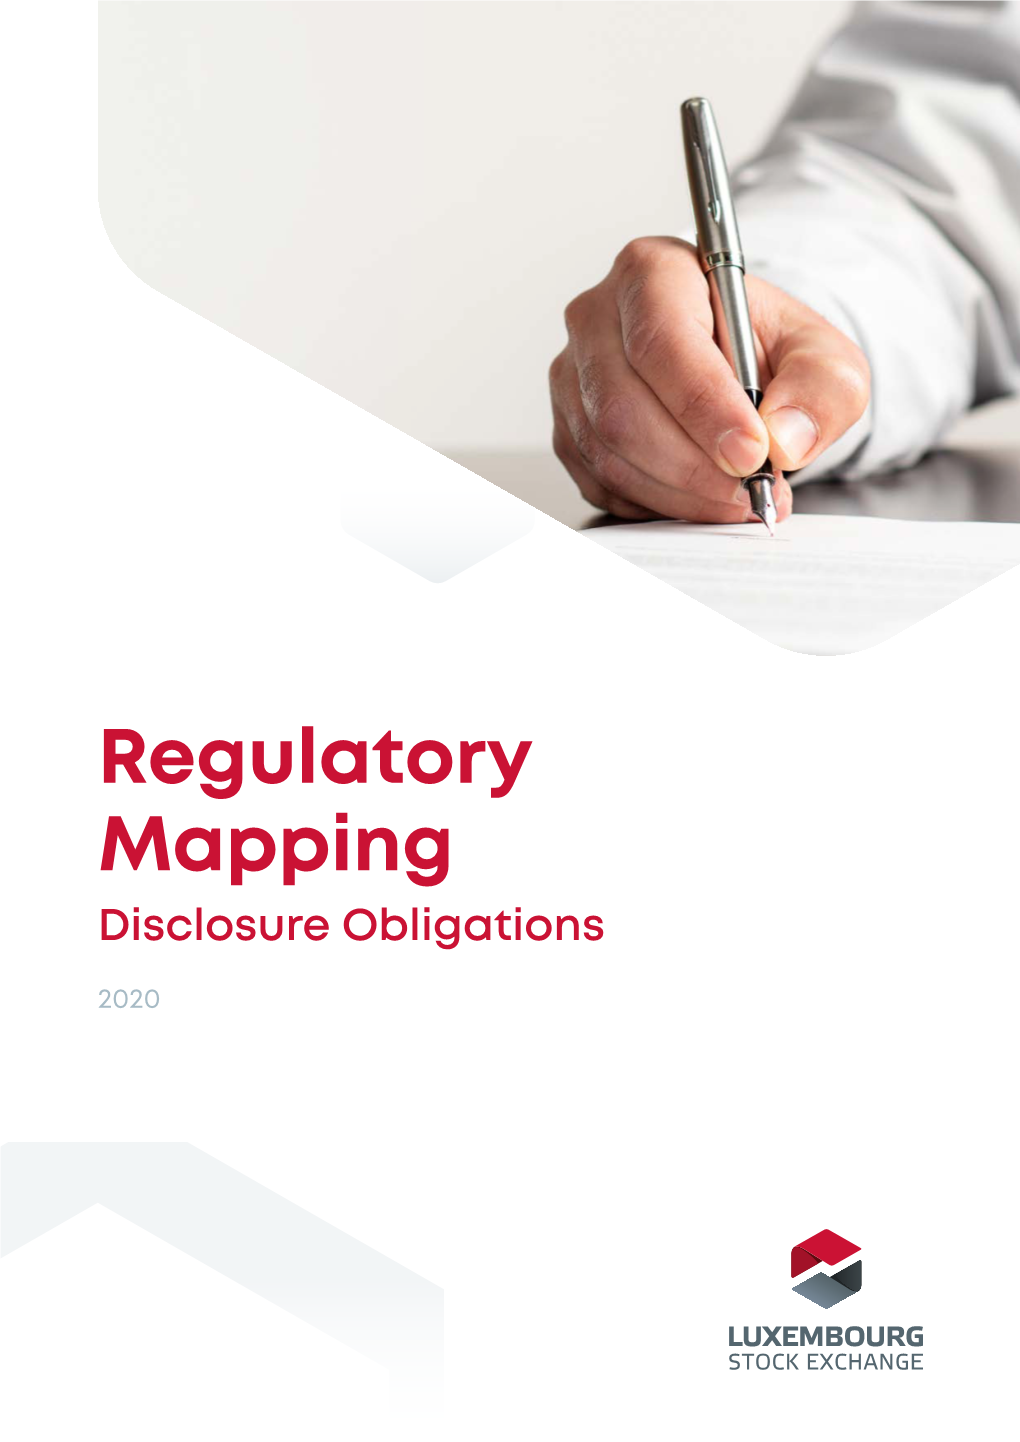 Regulatory Mapping Disclosure Obligations